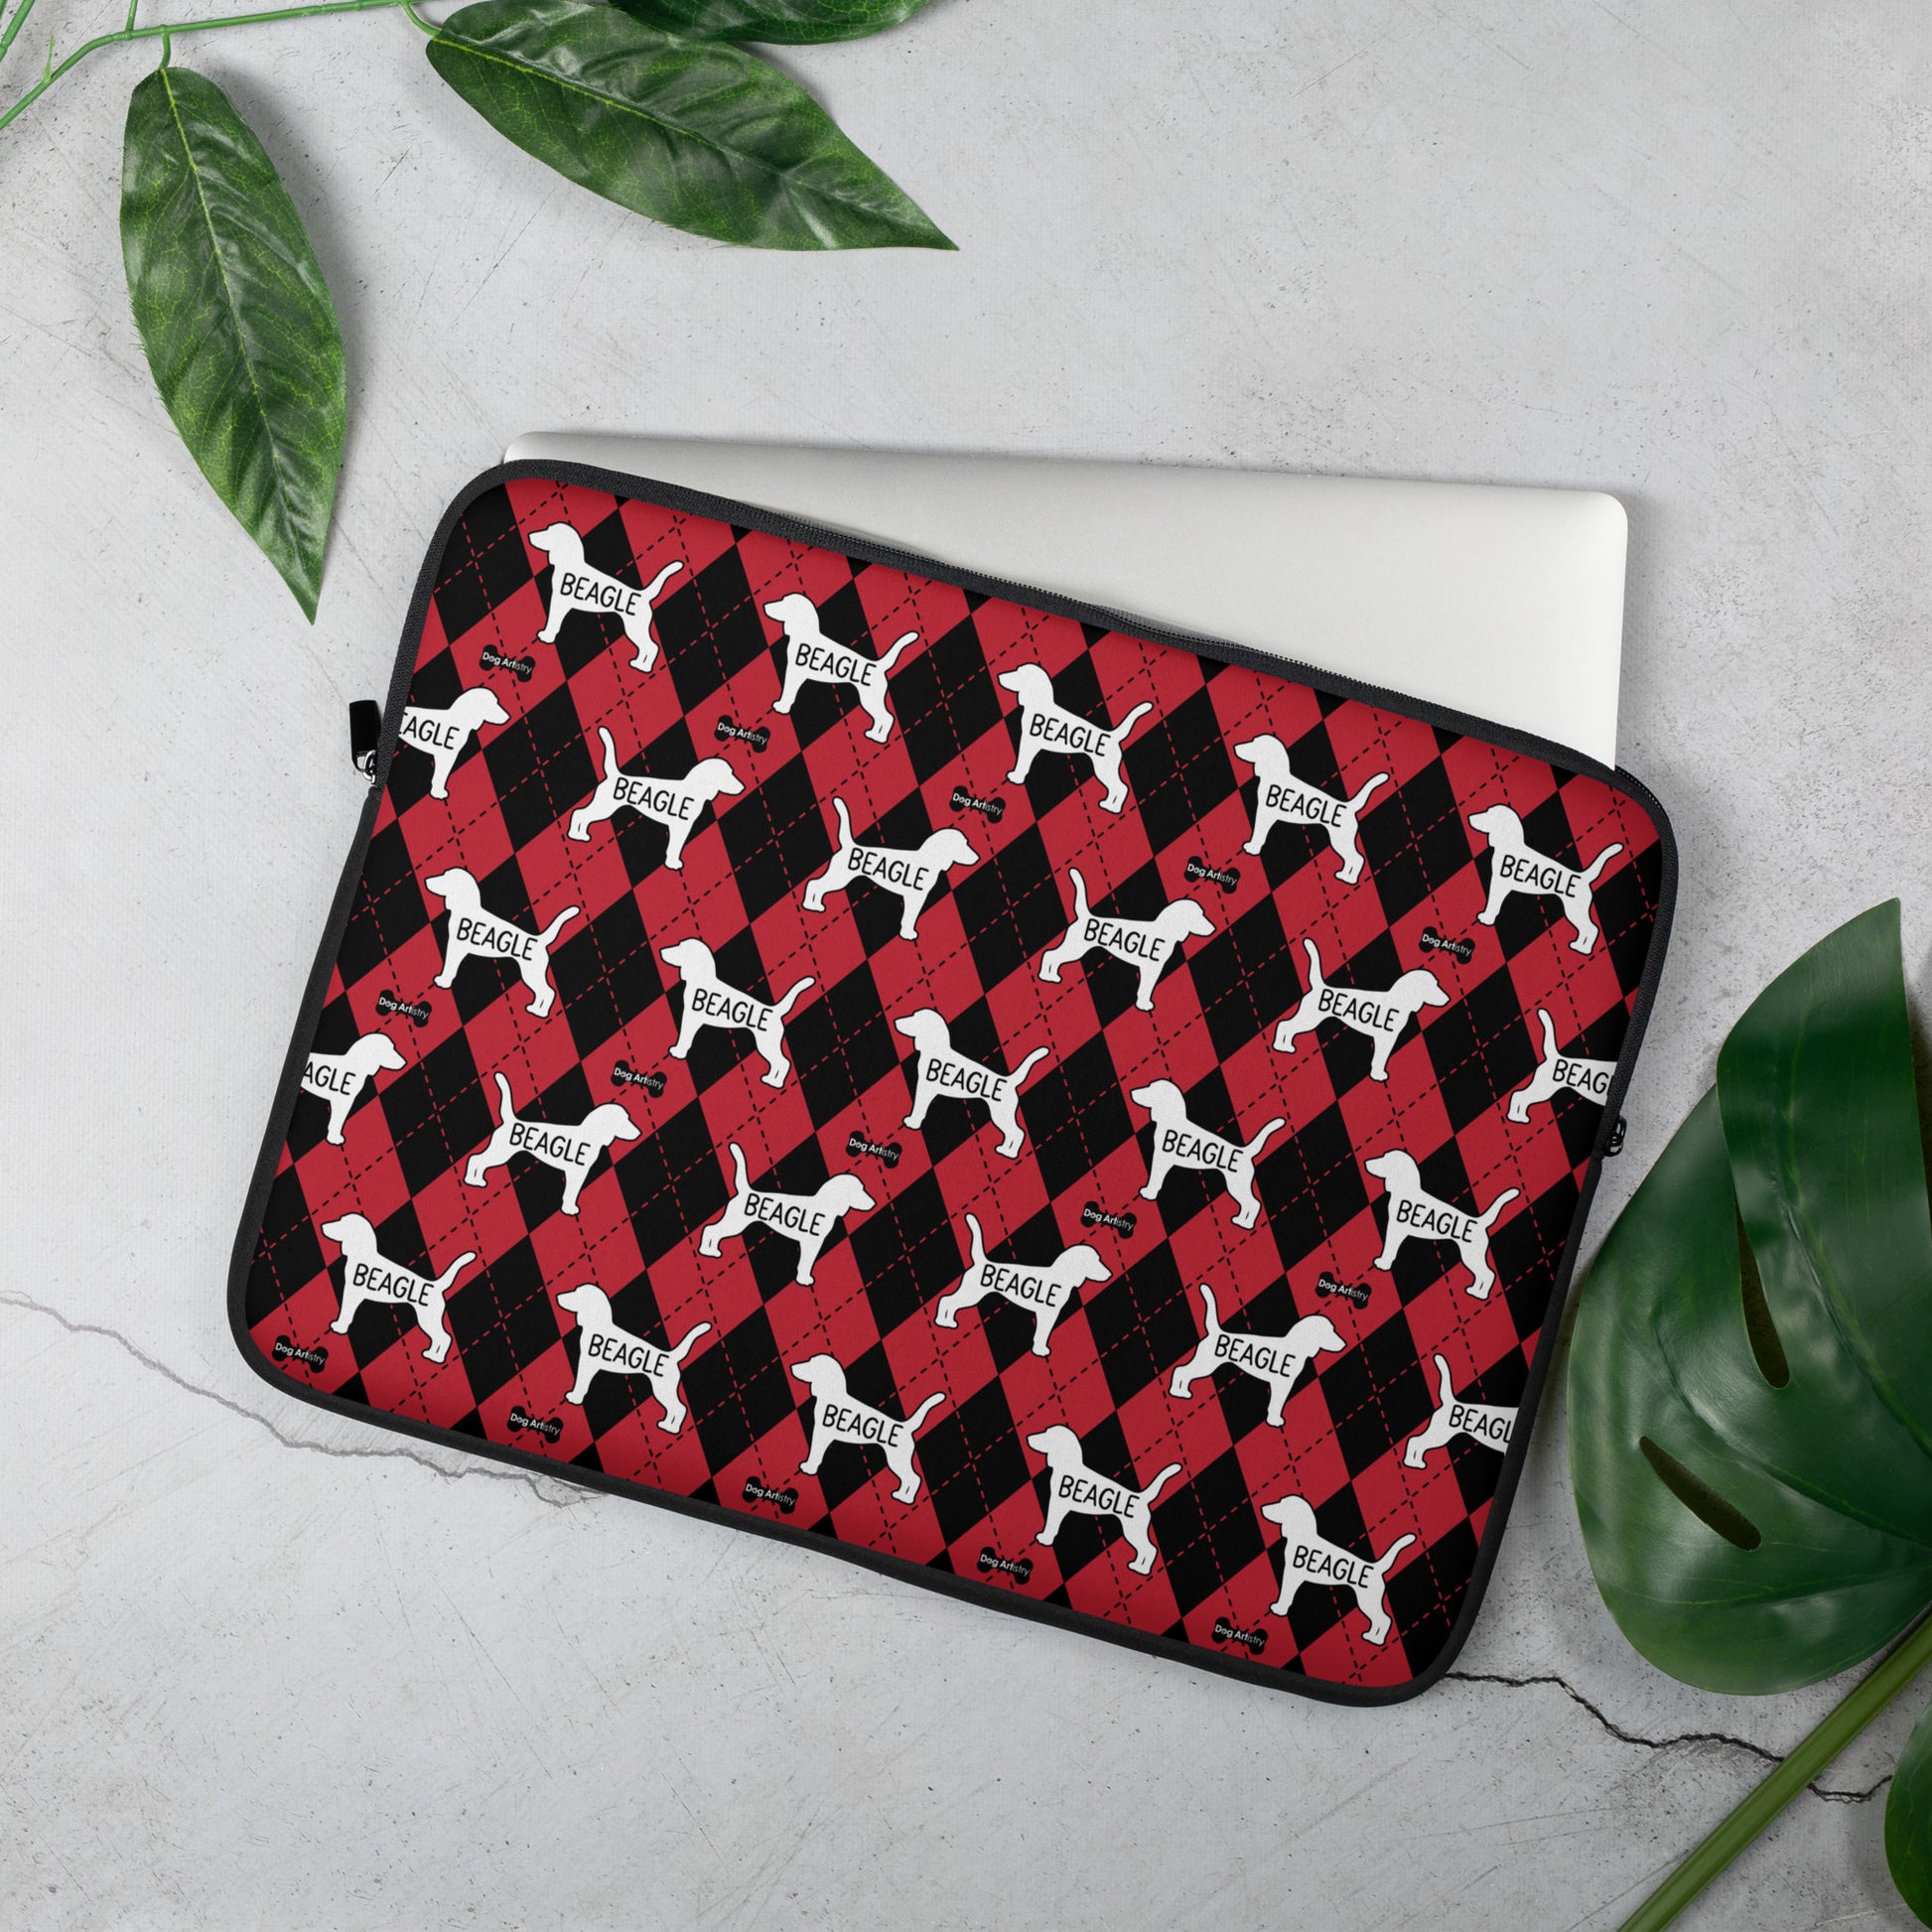 Beagle red and black argyle laptop sleeve by Dog Artistry